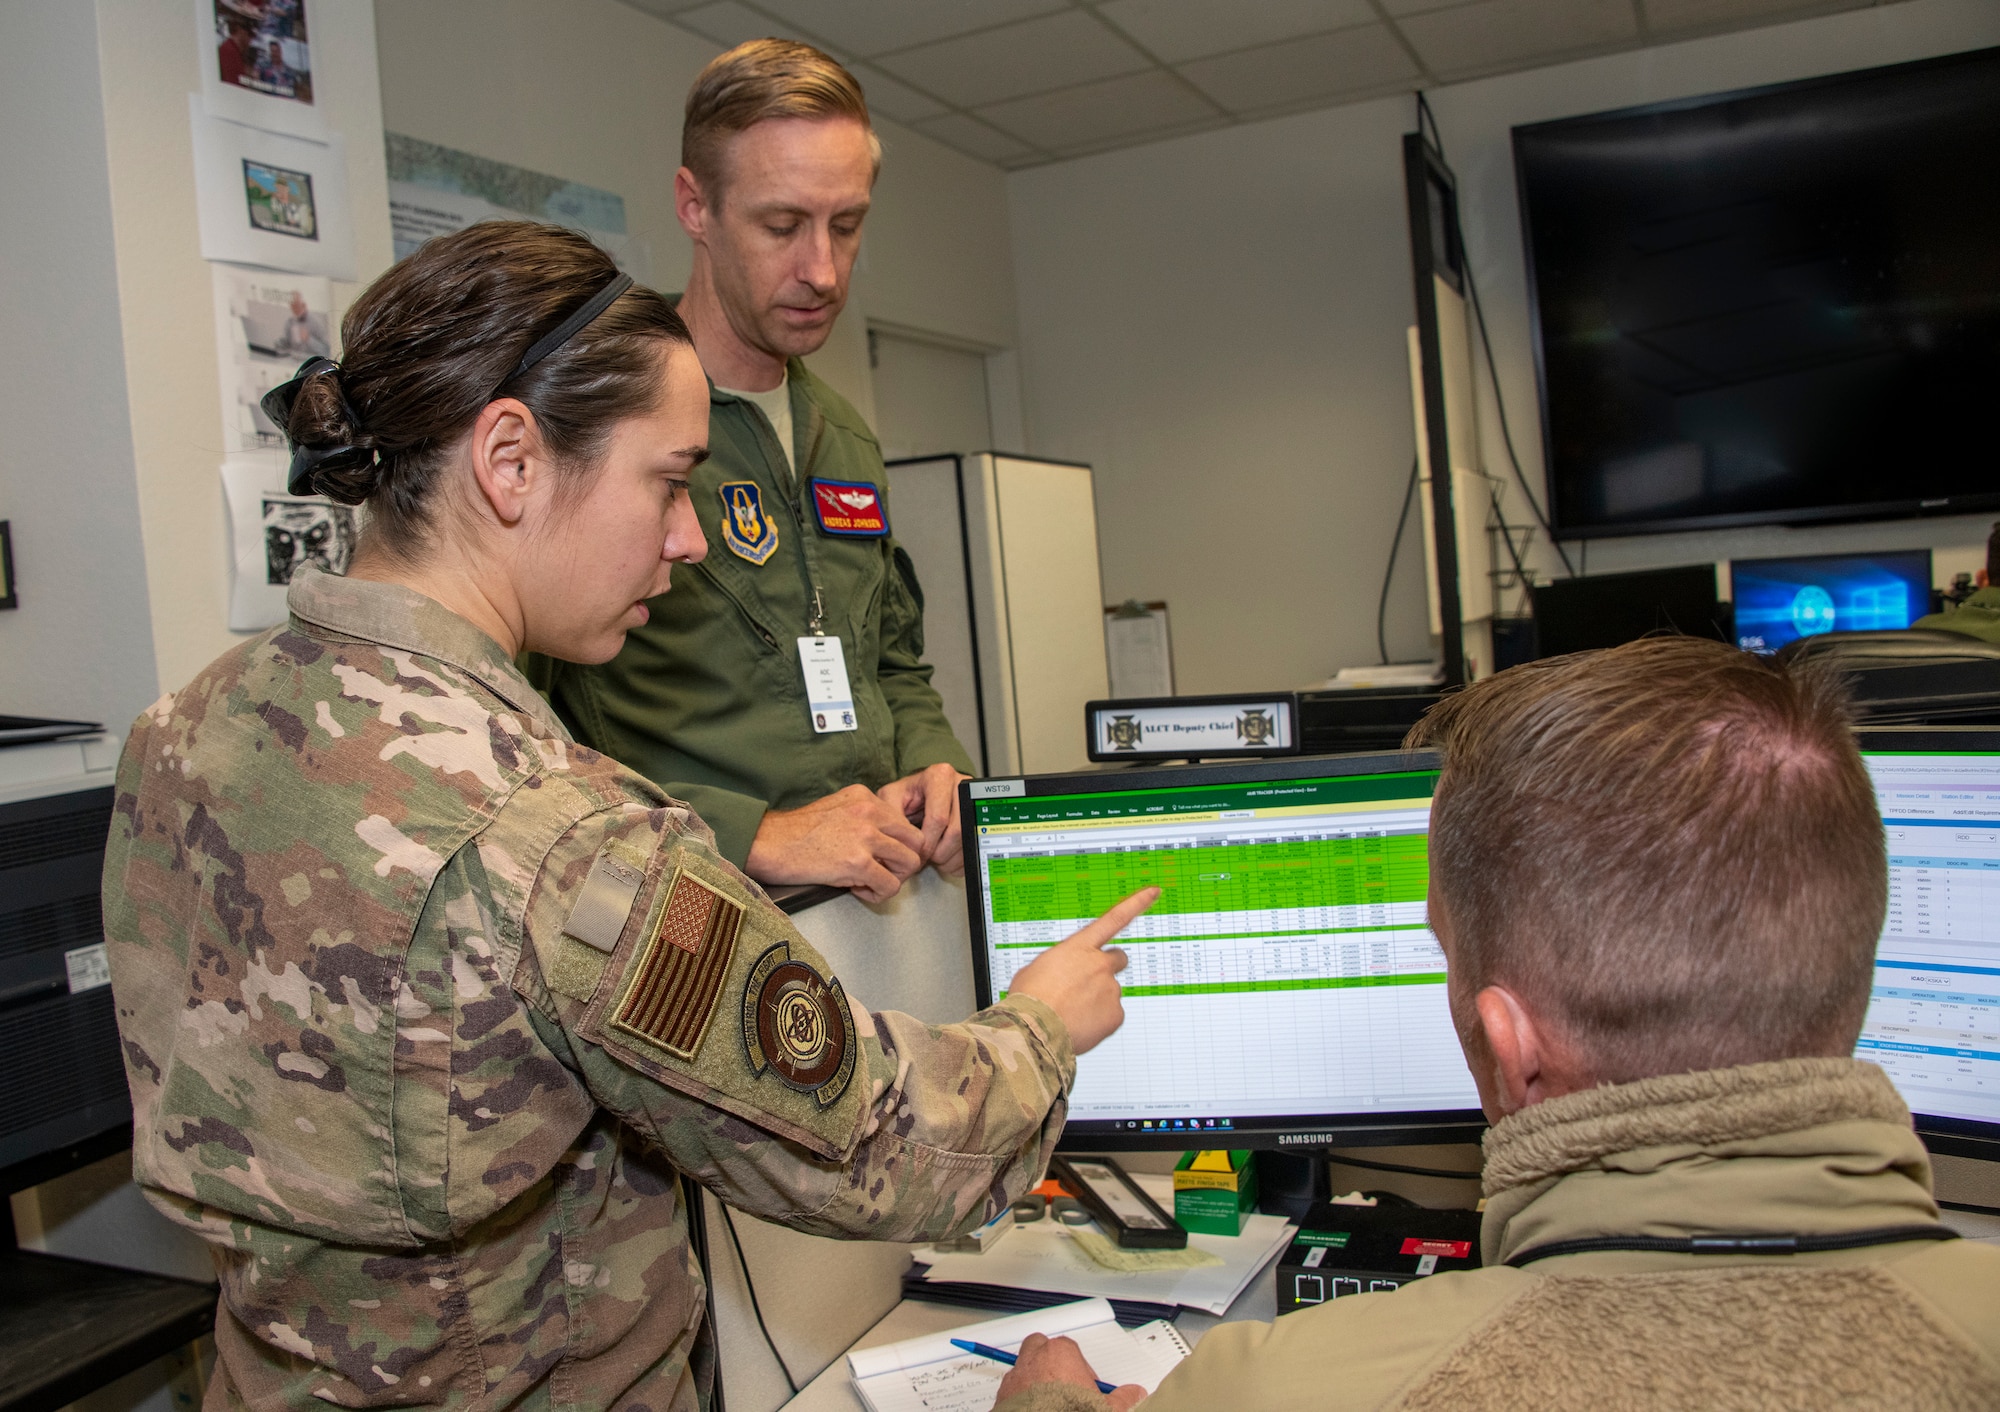 U.S. Air Capt. Lauren Allen, left, 321st Air Mobility Operations Squadron executive officer, Maj. Andreas Johnsen, center, 349th AMOS airlift control team chief and Tech. Sgt. Sam Caryl, 321st AMOS squadron requirements planner, study data files at the Weapons Systems Suite in the Air Operations Center during exercise Mobility Guardian Sept. 25, 2019, at Travis Air Force Base, California. MG19 is Air Mobility Command’s flagship exercise for large-scale, rapid global mobility operations. Forty-six U.S. aircraft joined aircraft from 29 international partners, along with more than 4,000 U.S. and international Air Force, Army, Navy and Marine Corps aviators. (U.S. Air Force photo by Heide Couch)